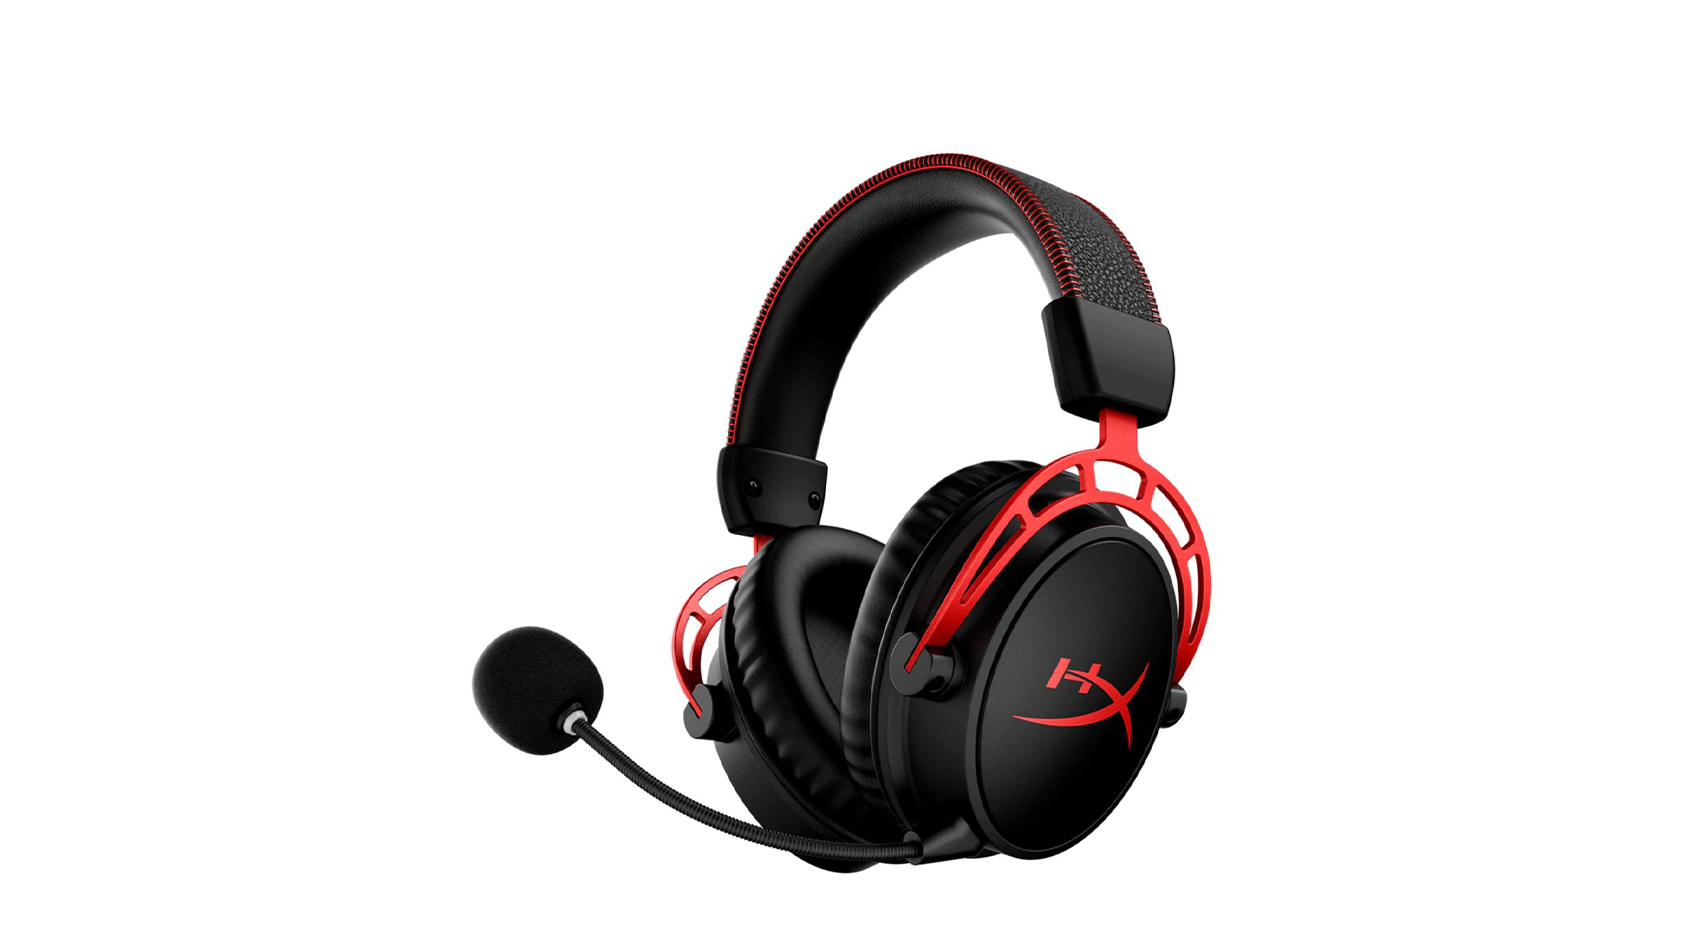 The HyperX Cloud Alpha Wireless in black/red against a white background.